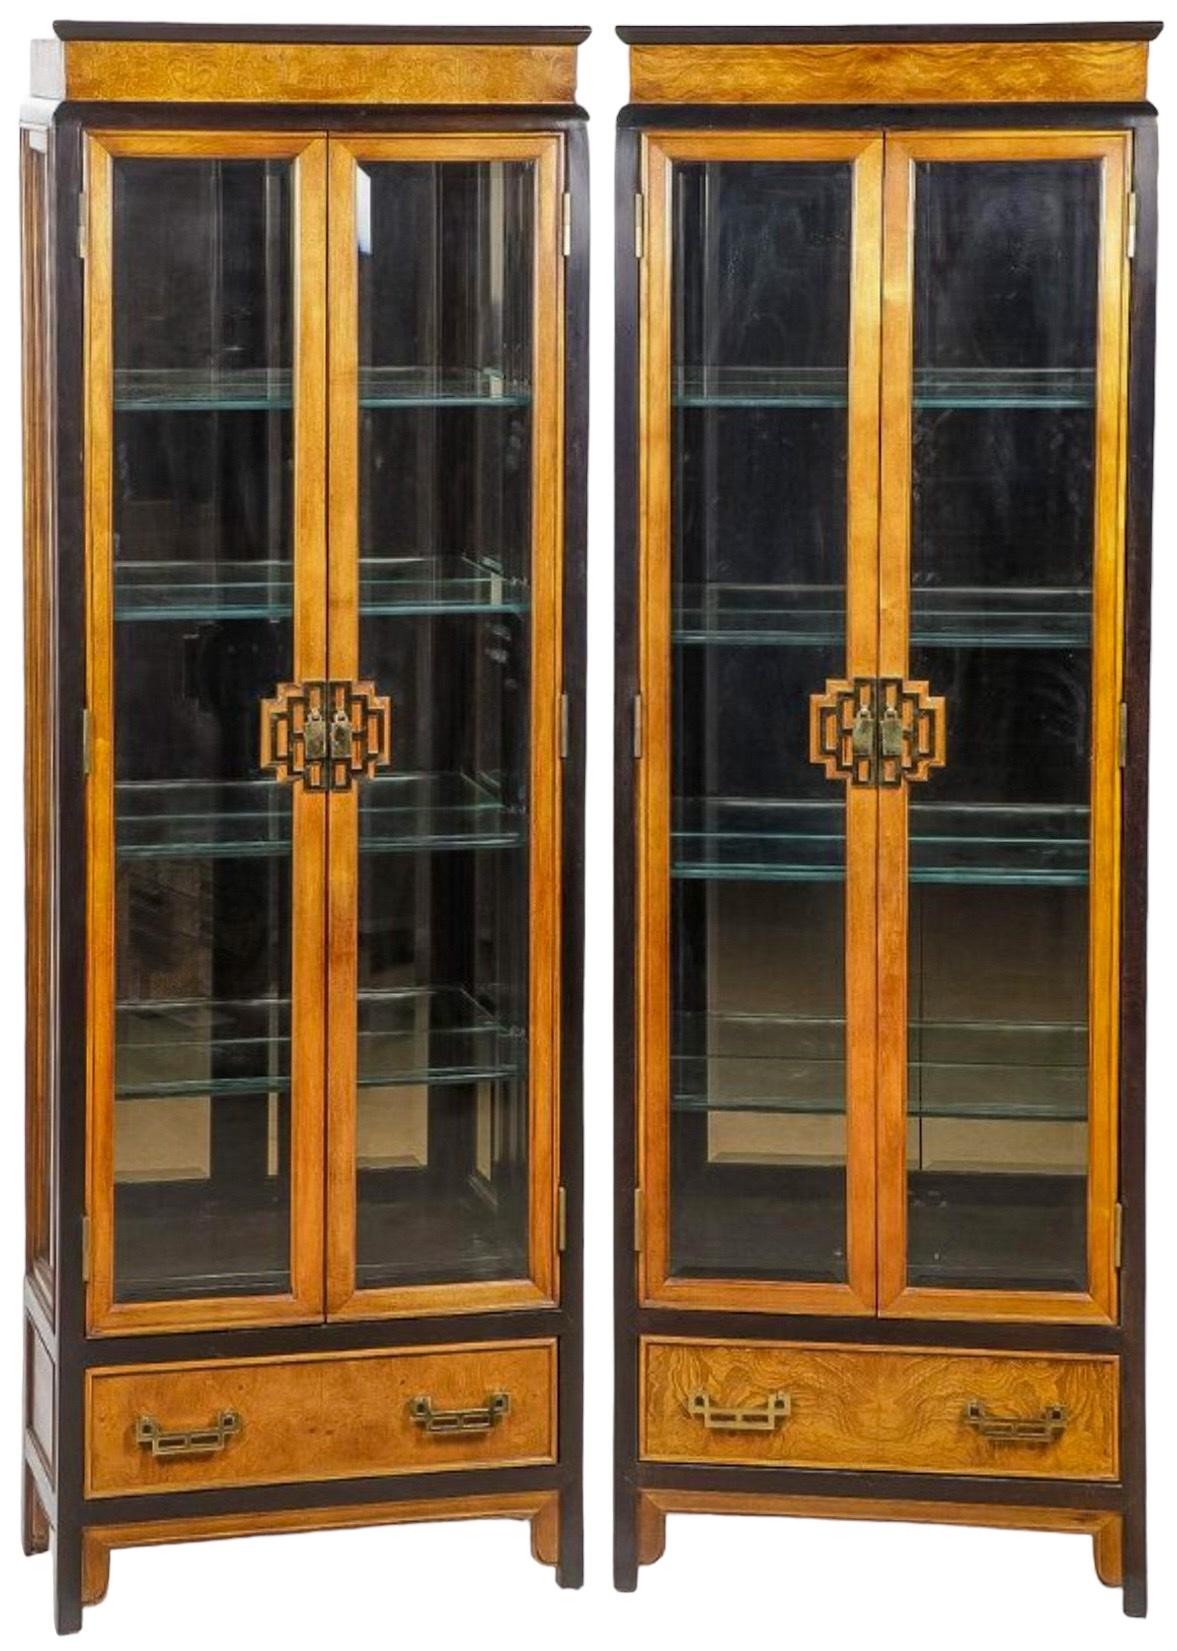 James Mont Asian Modern Style Burl & Brass Vitrines / Display Cabinets - Pair For Sale 3